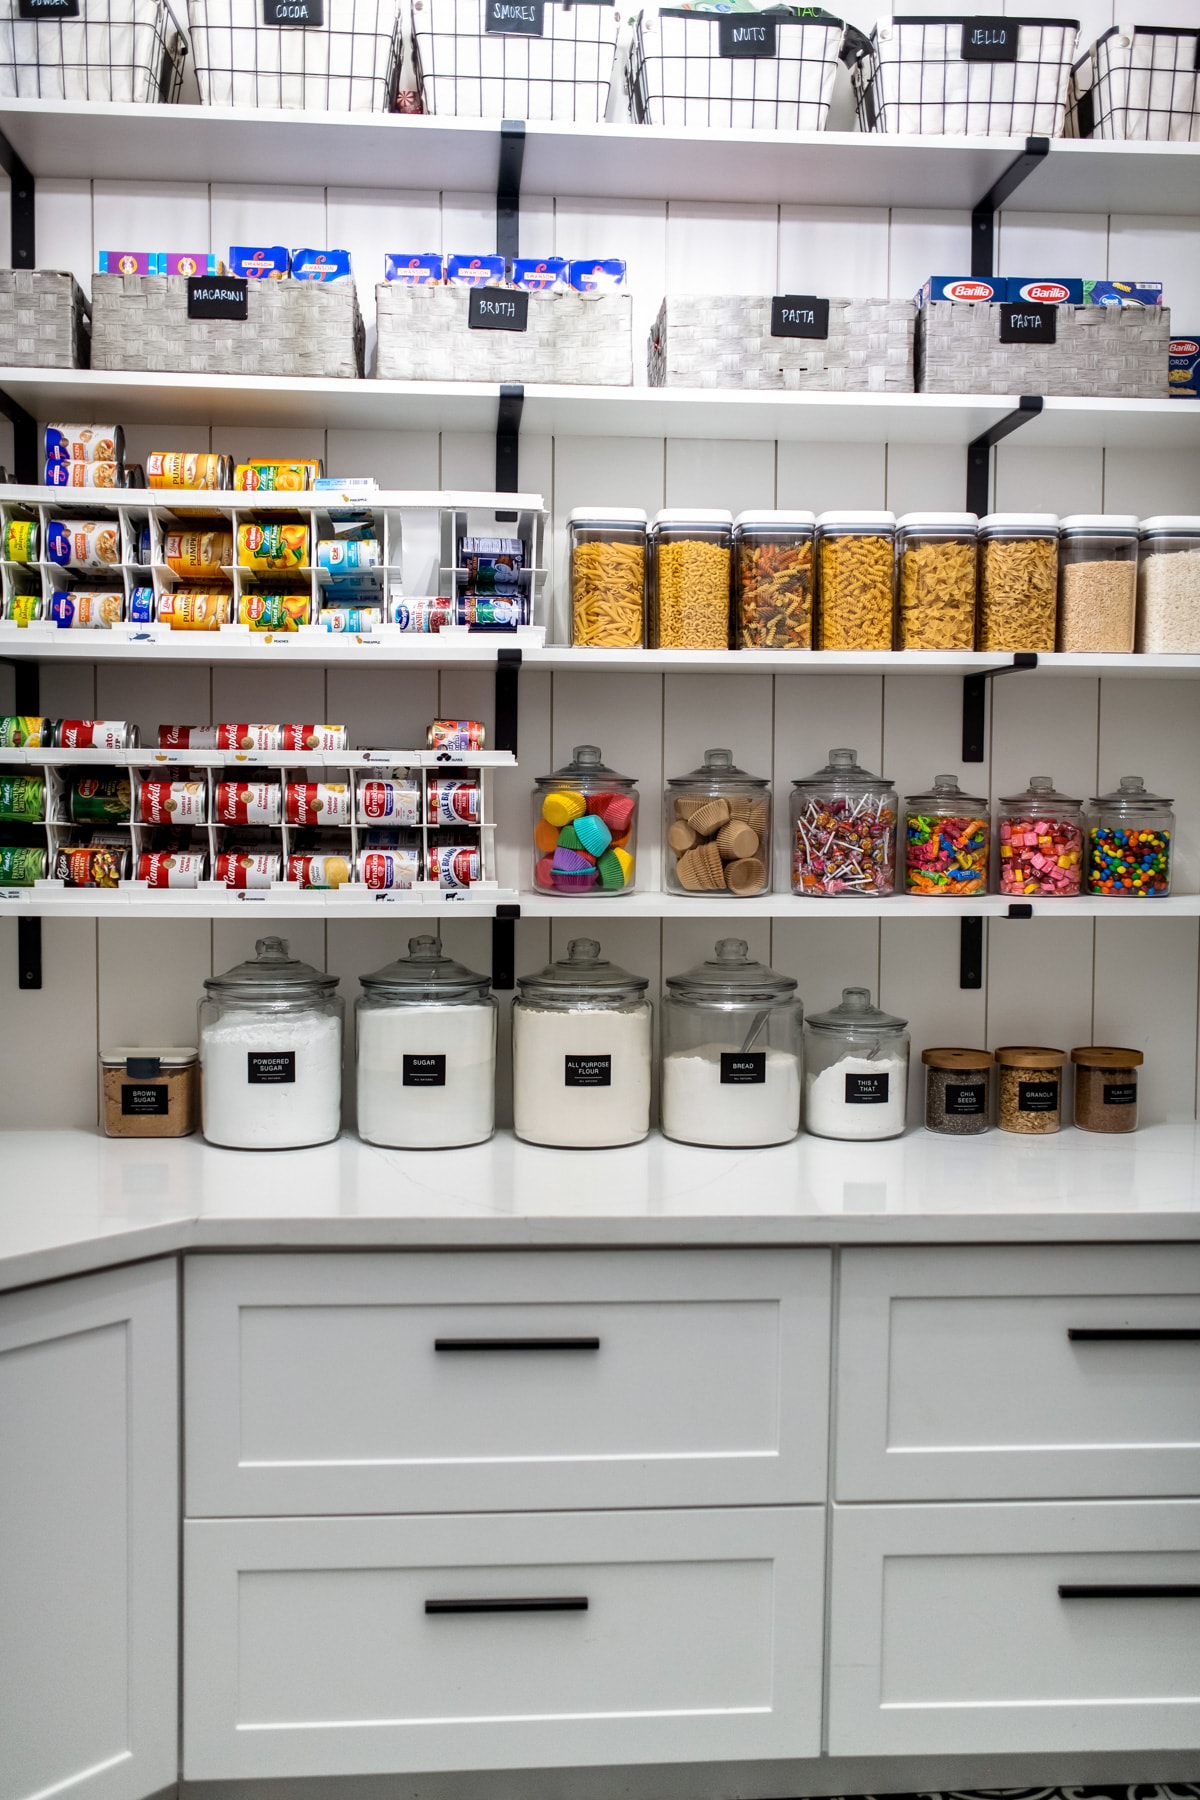 An organized pantry with labeled baskets, can organizers, food storage containers, and labeled jars lining the shelves.